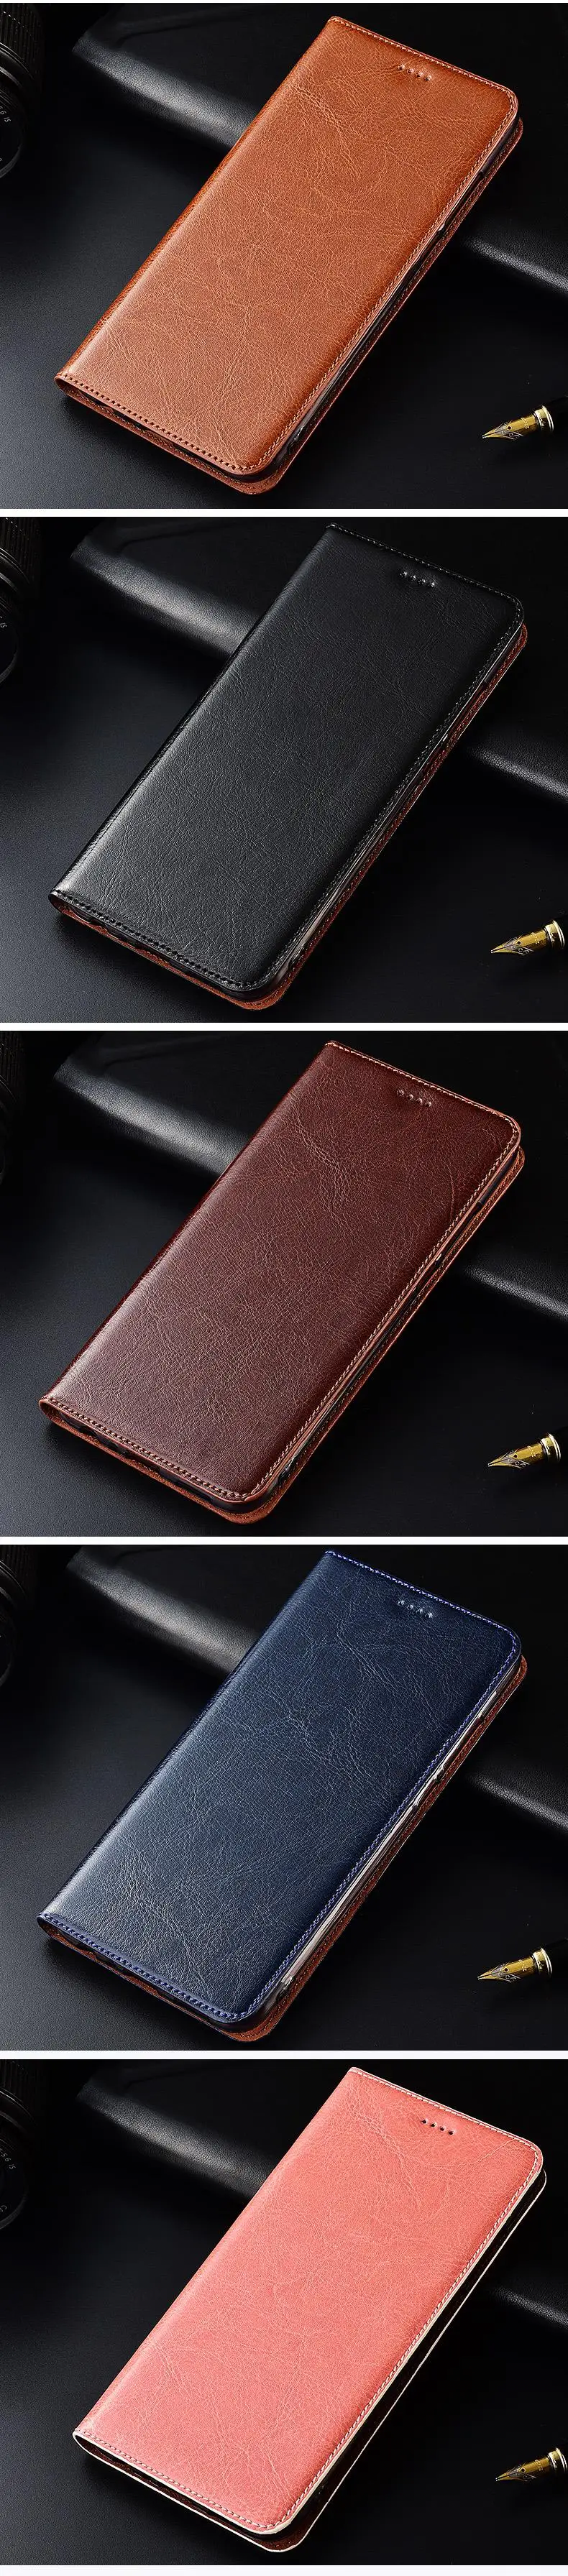 Genuine Cow Leather Case For Xiaomi Redmi Note 3 4 4X 5 5A 6 7 8 9 9S Pro 8T Magnetic Case Stand Flip Phone Cover xiaomi leather case cover